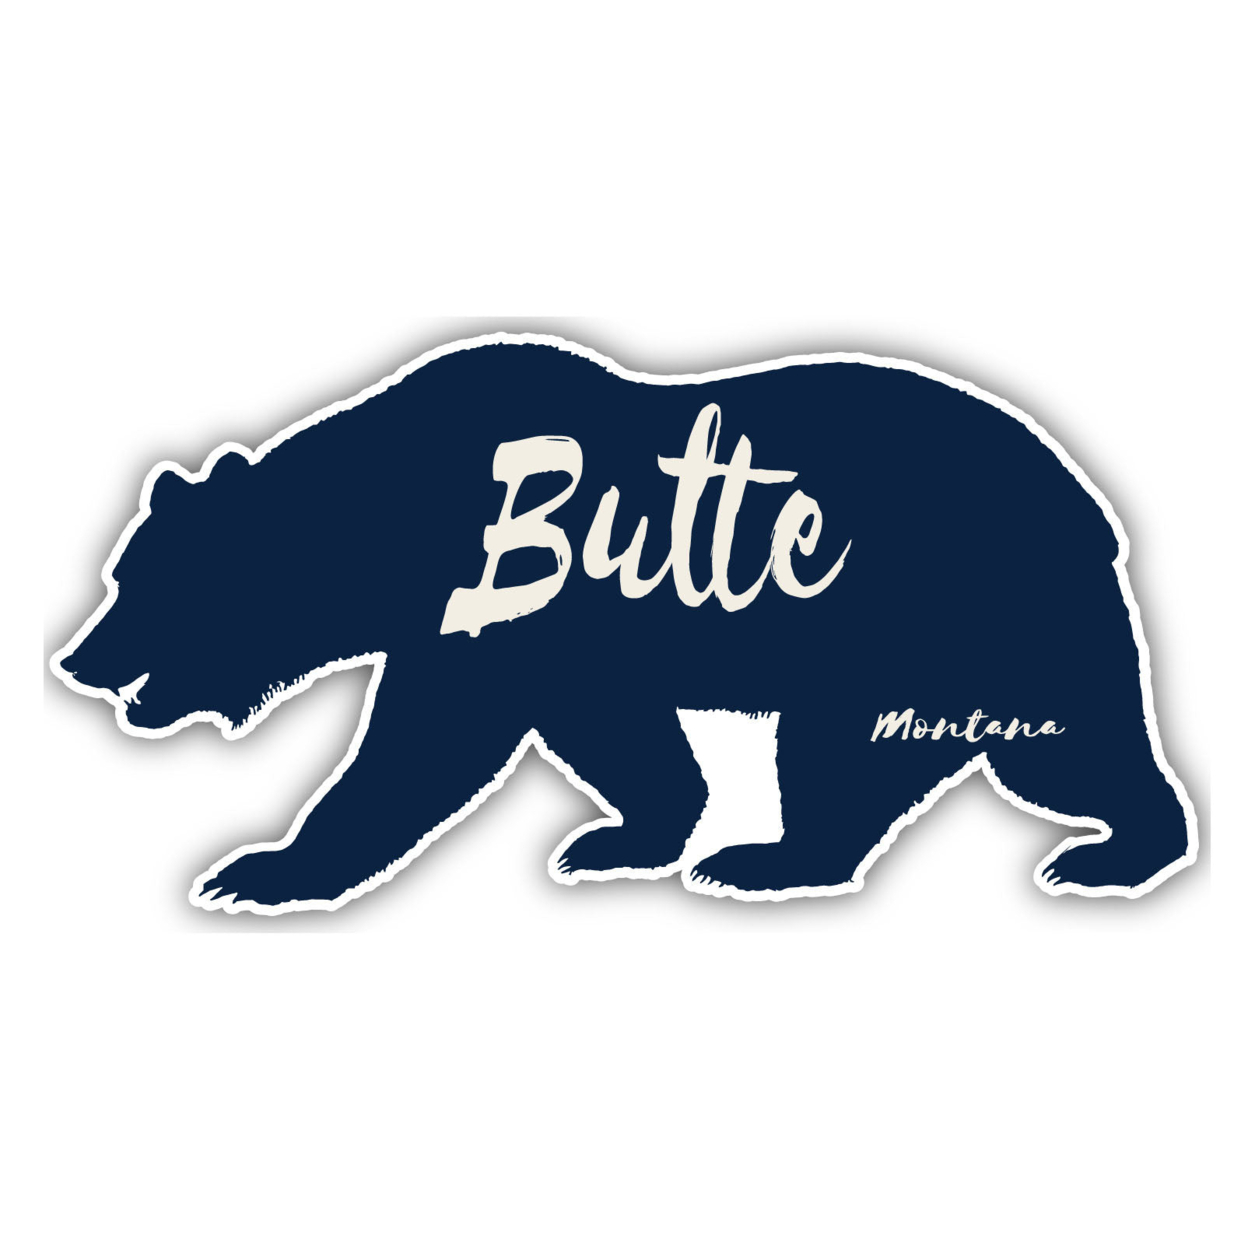 Butte Montana Souvenir Decorative Stickers (Choose Theme And Size) - 4-Pack, 12-Inch, Bear